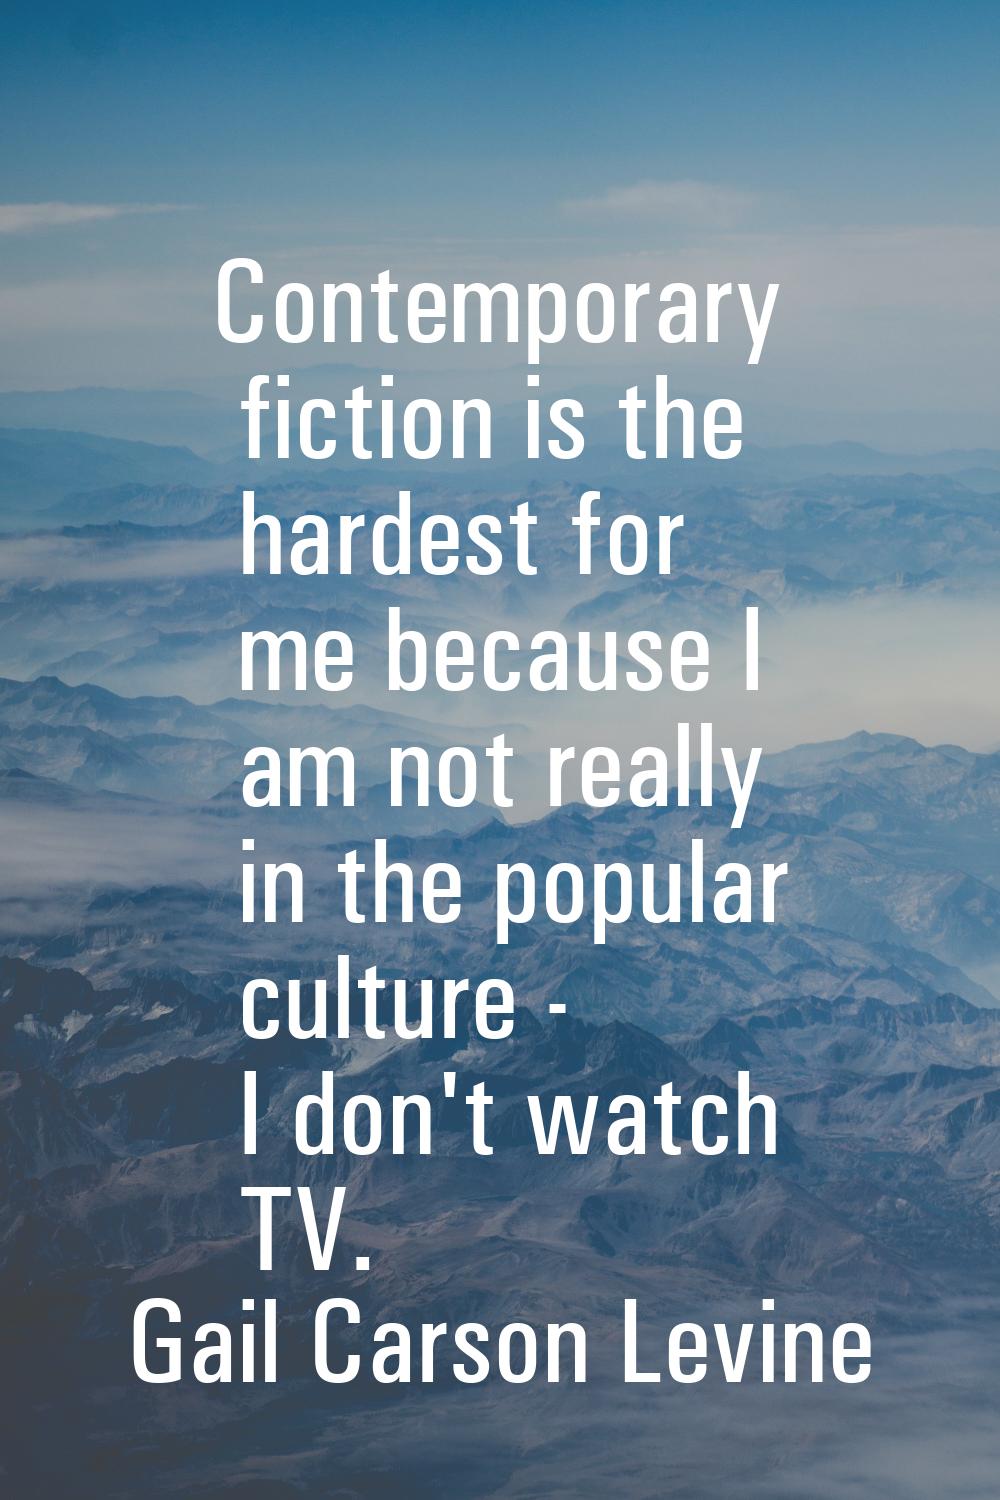 Contemporary fiction is the hardest for me because I am not really in the popular culture - I don't